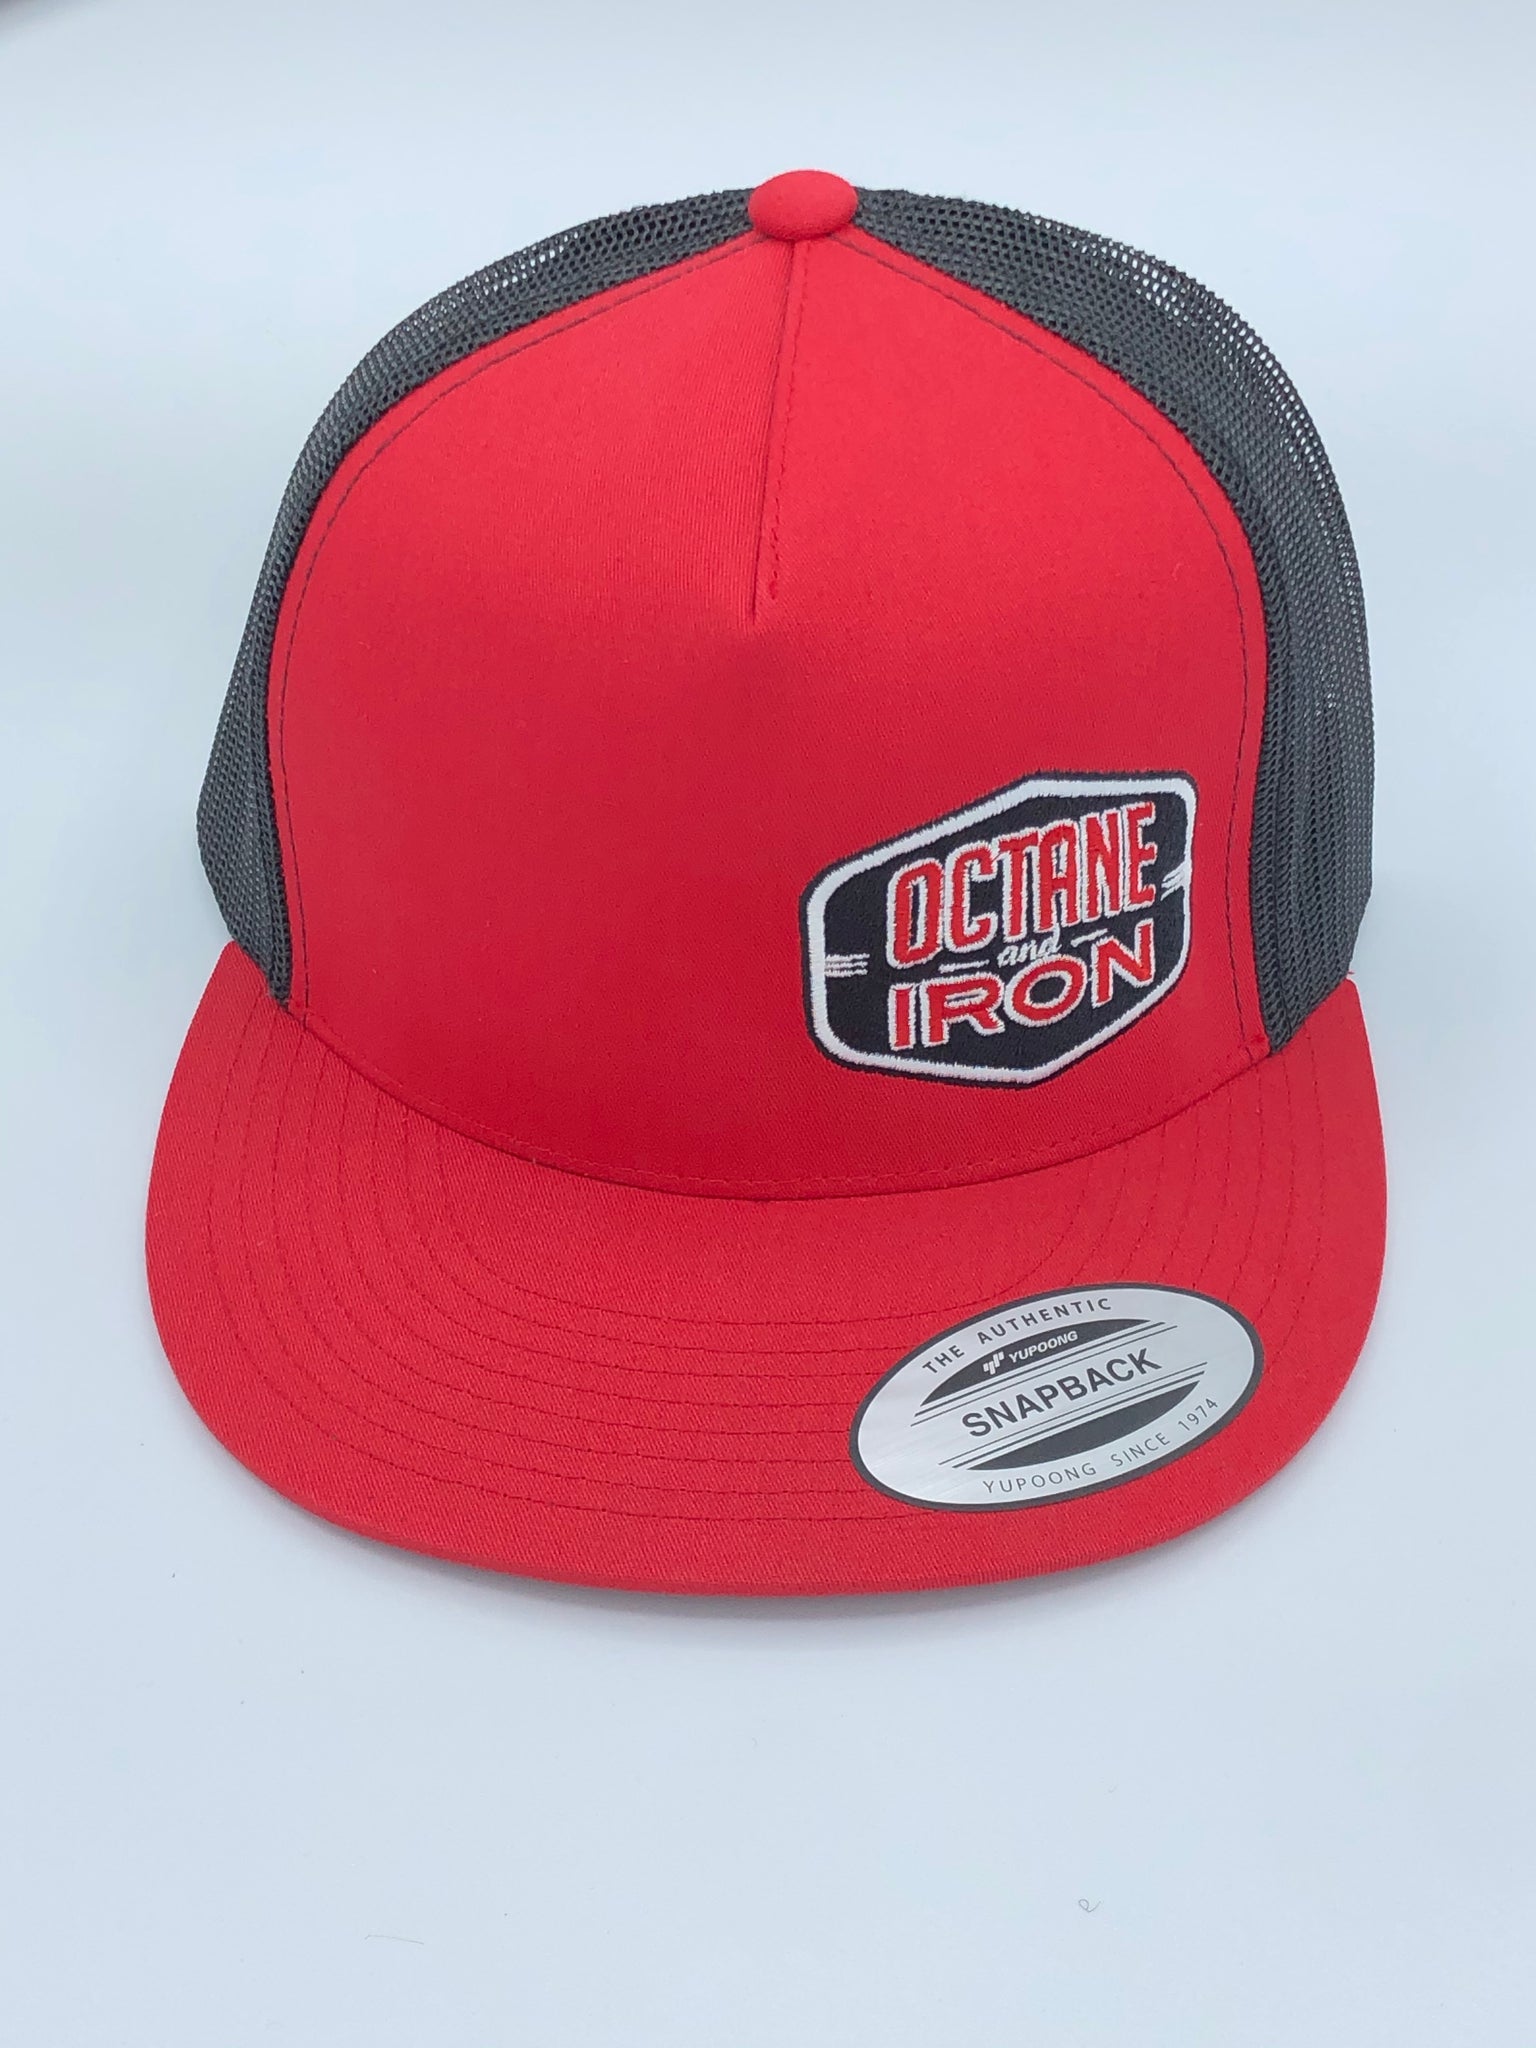 Two-Tone Red and Black Snapback Flat Bill